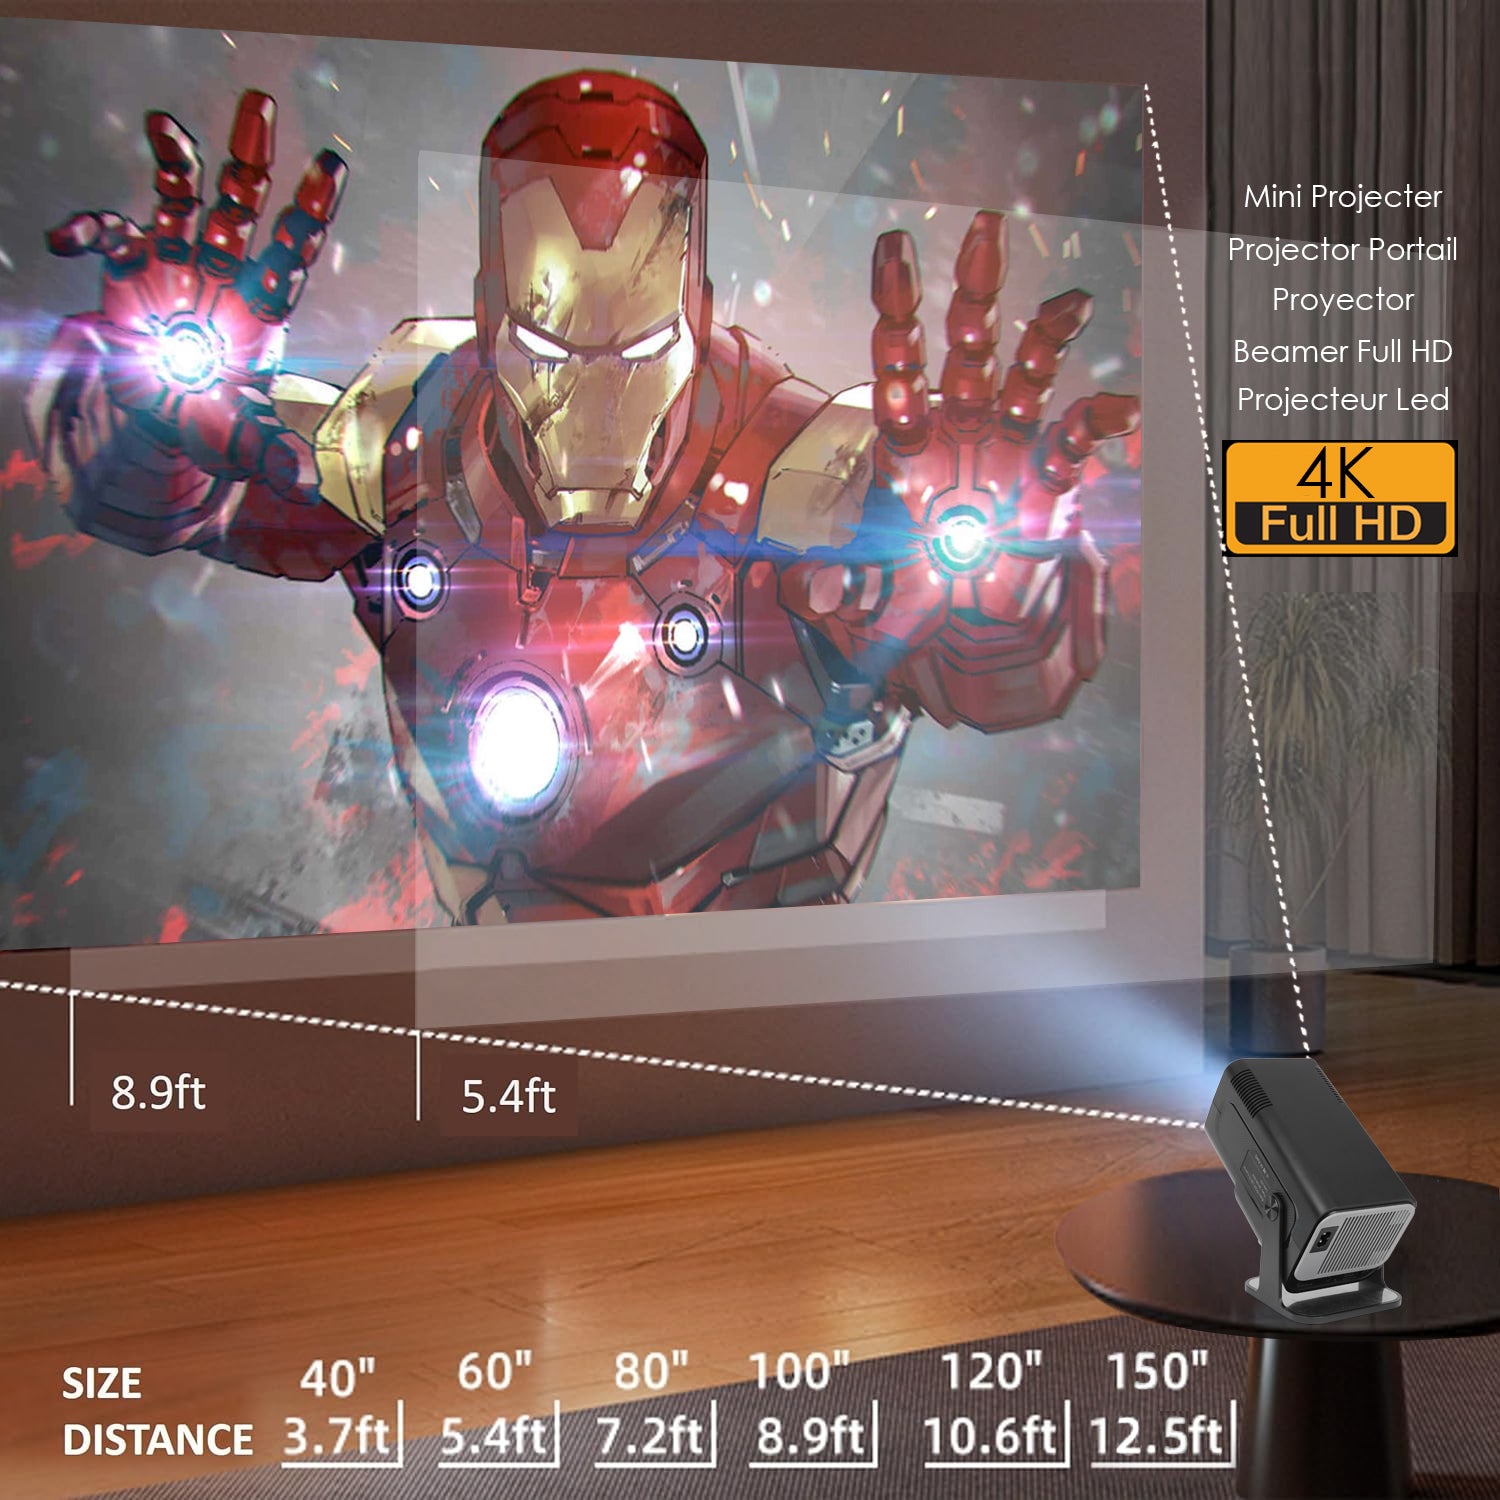 4K Smart Android Based Projector With Inbuilt Streaming Apps